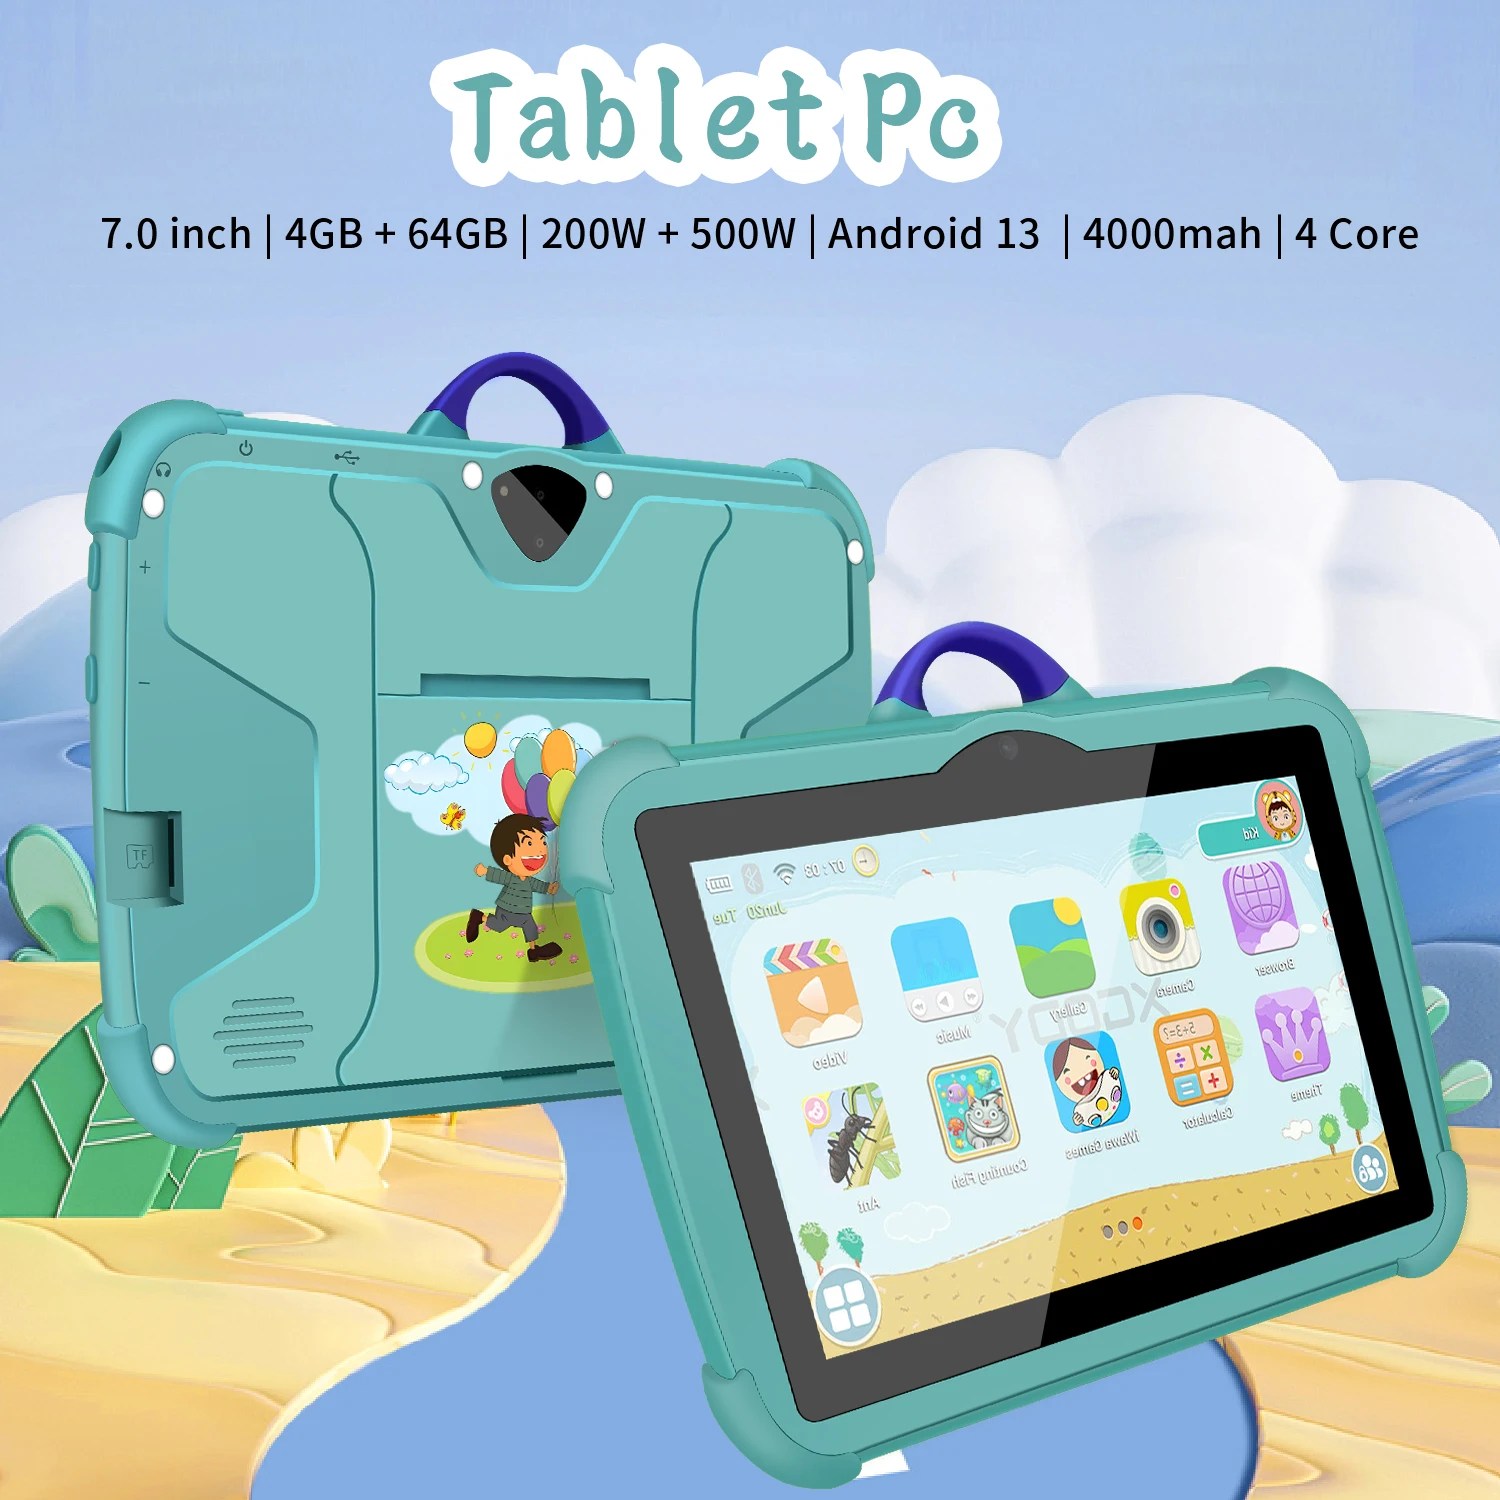 7 Inch Sauenaneo 5G WiFi Kids Tablets 4GB RAM 64GB ROM For Study Education Quad Core Google Play Children's Gift Tablet 4000mAh